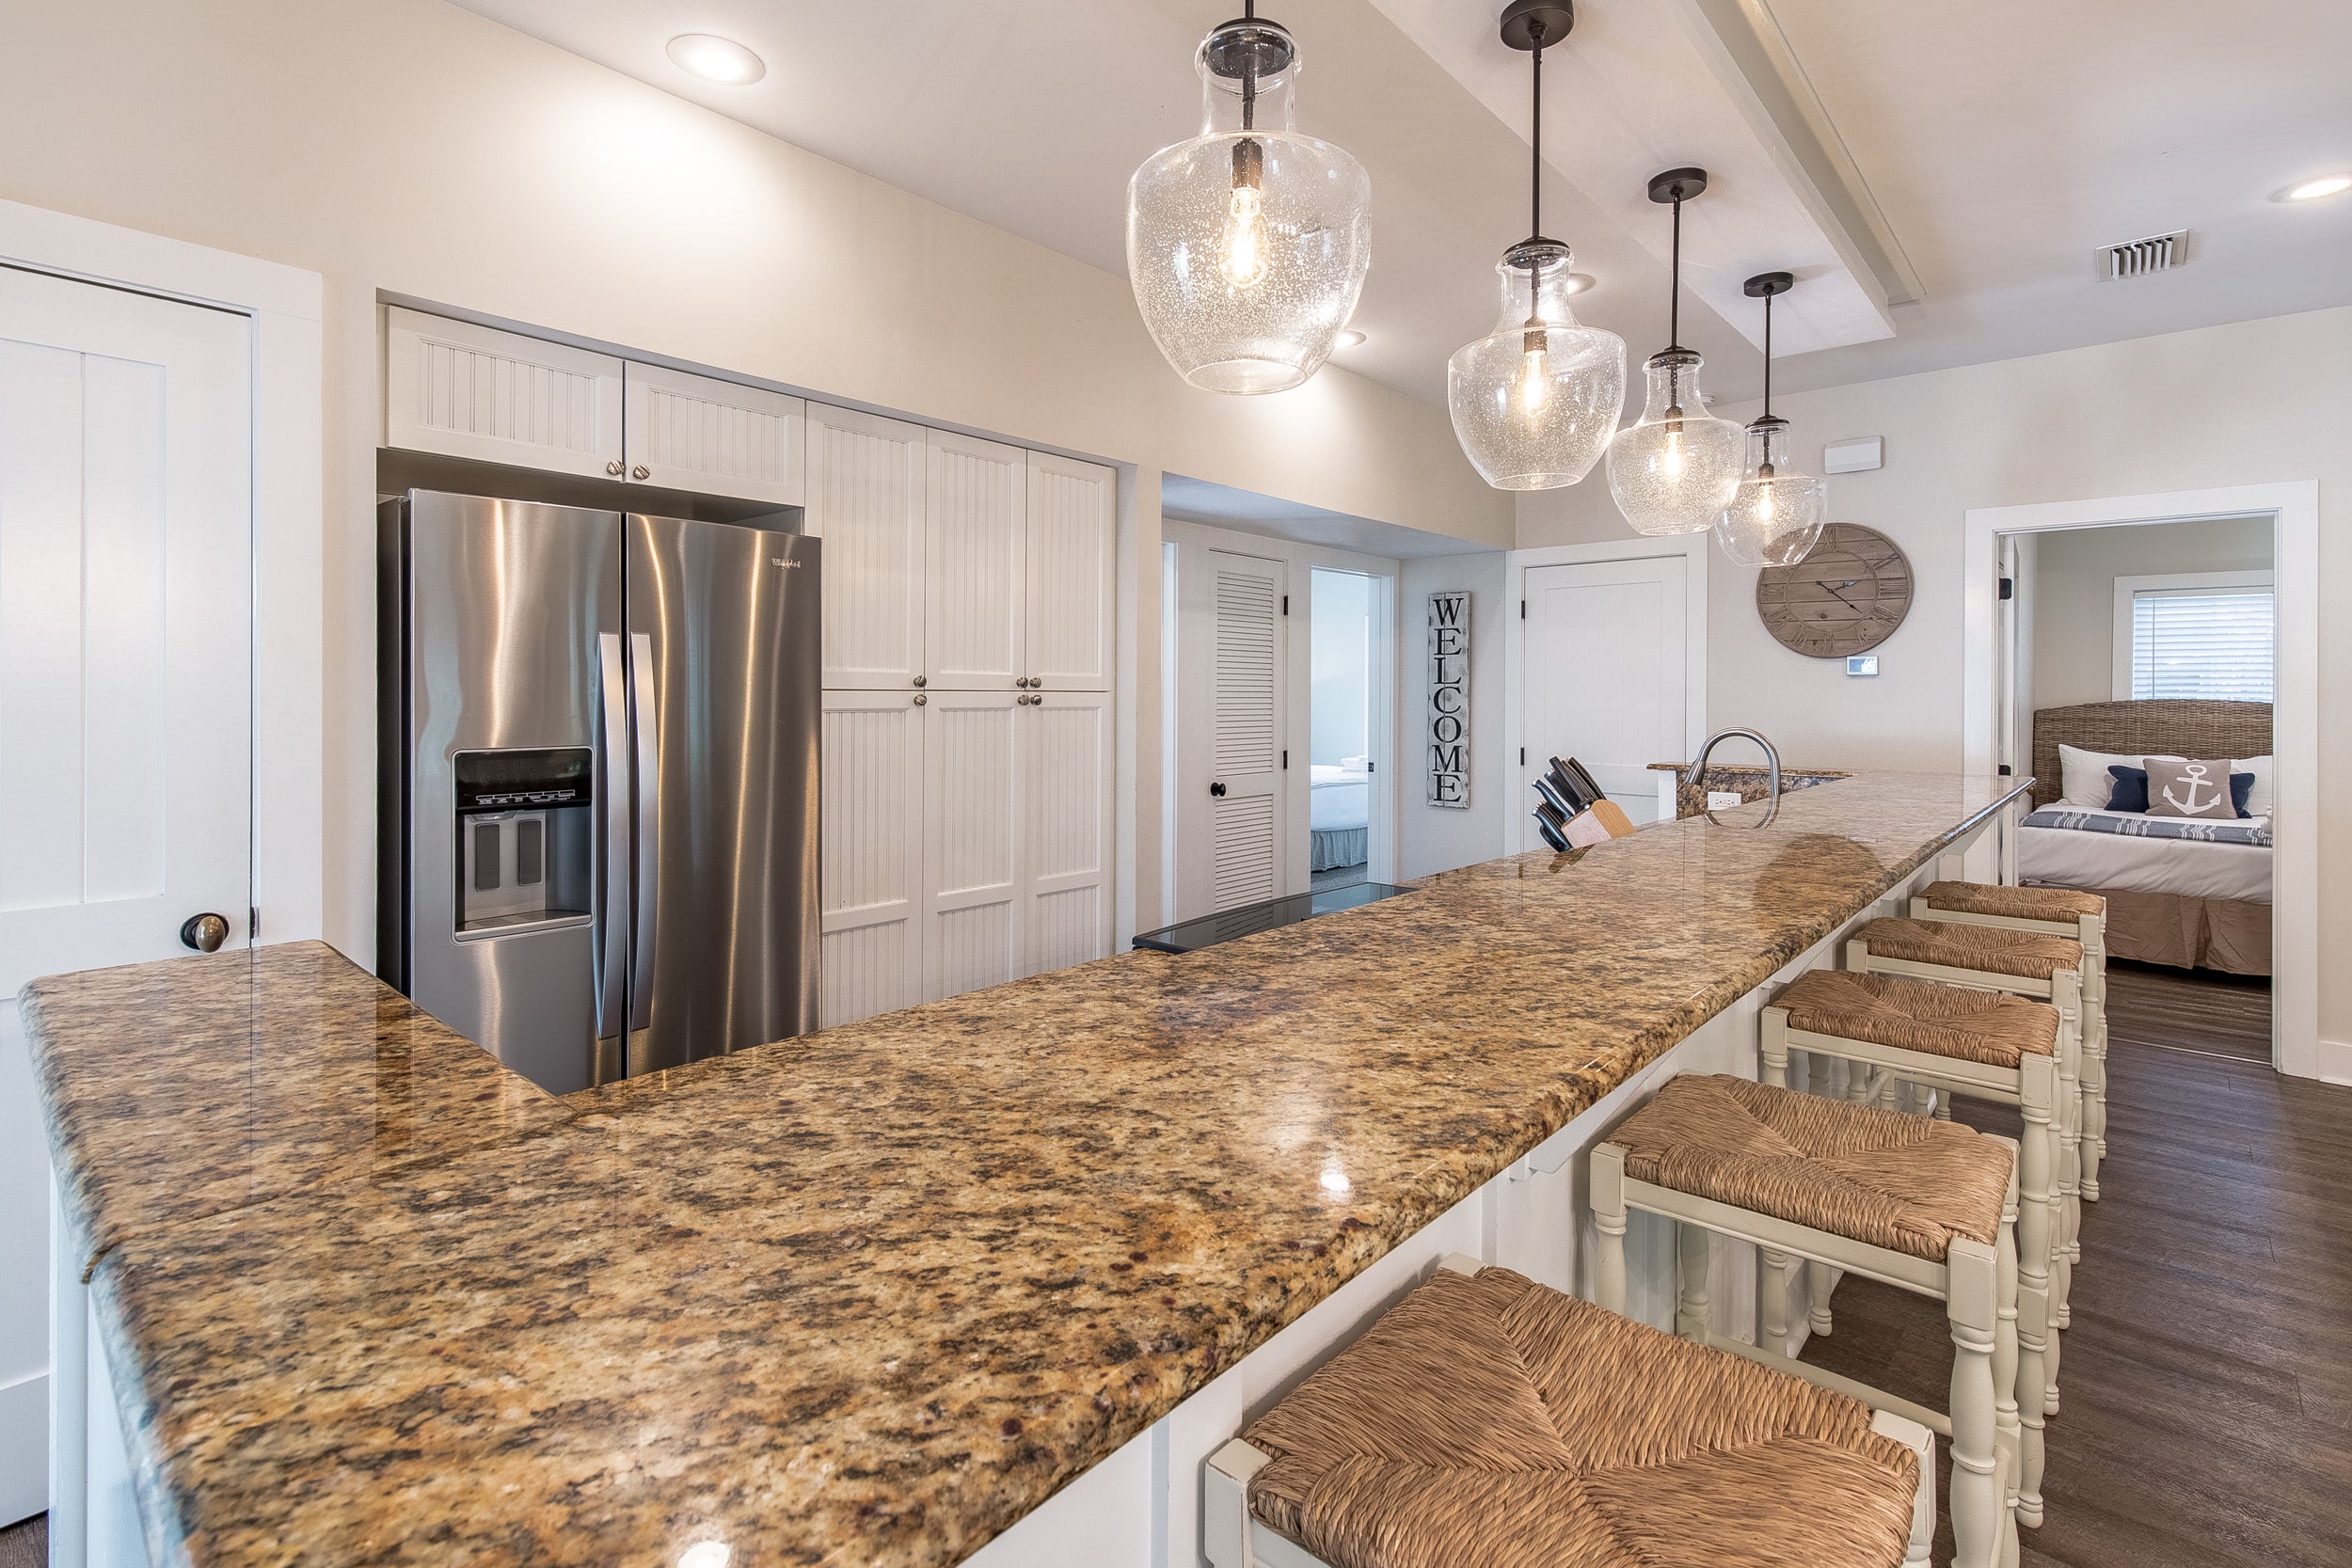 Plenty of Space on this Granite Counter top